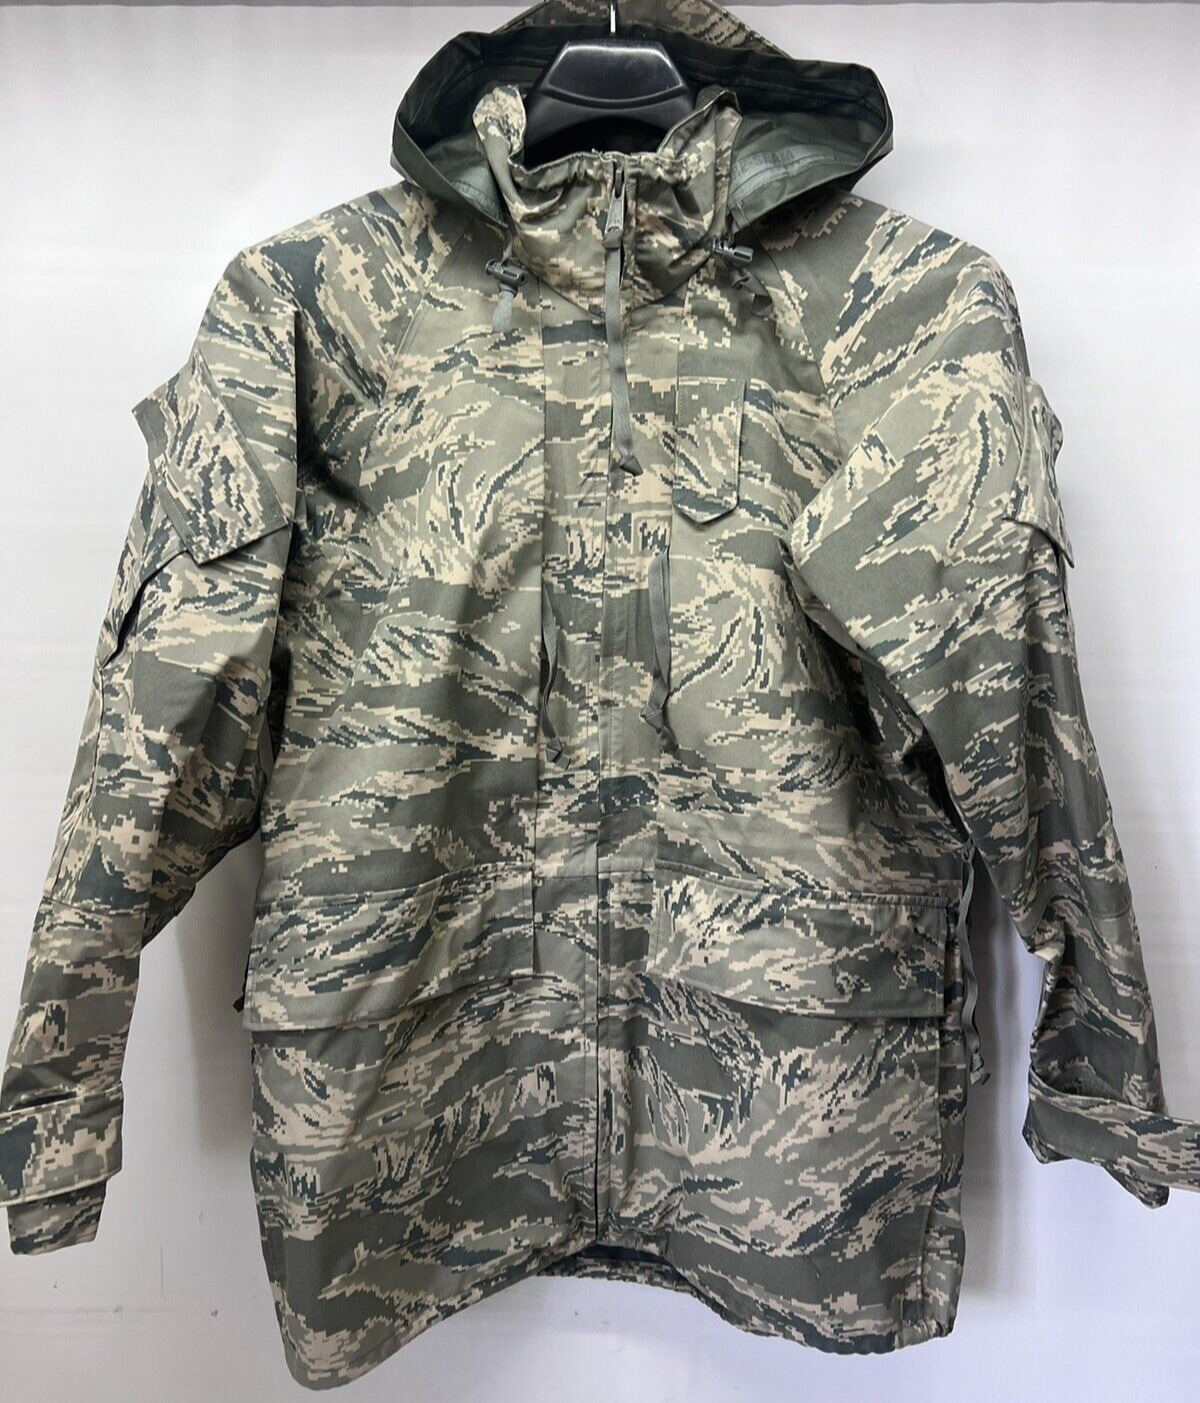 MILITARY PARKA ALL-PURPOSE ENVIRONMENTAL CAMOUFLAGE GORE-TEX  SIZE X-SMALL